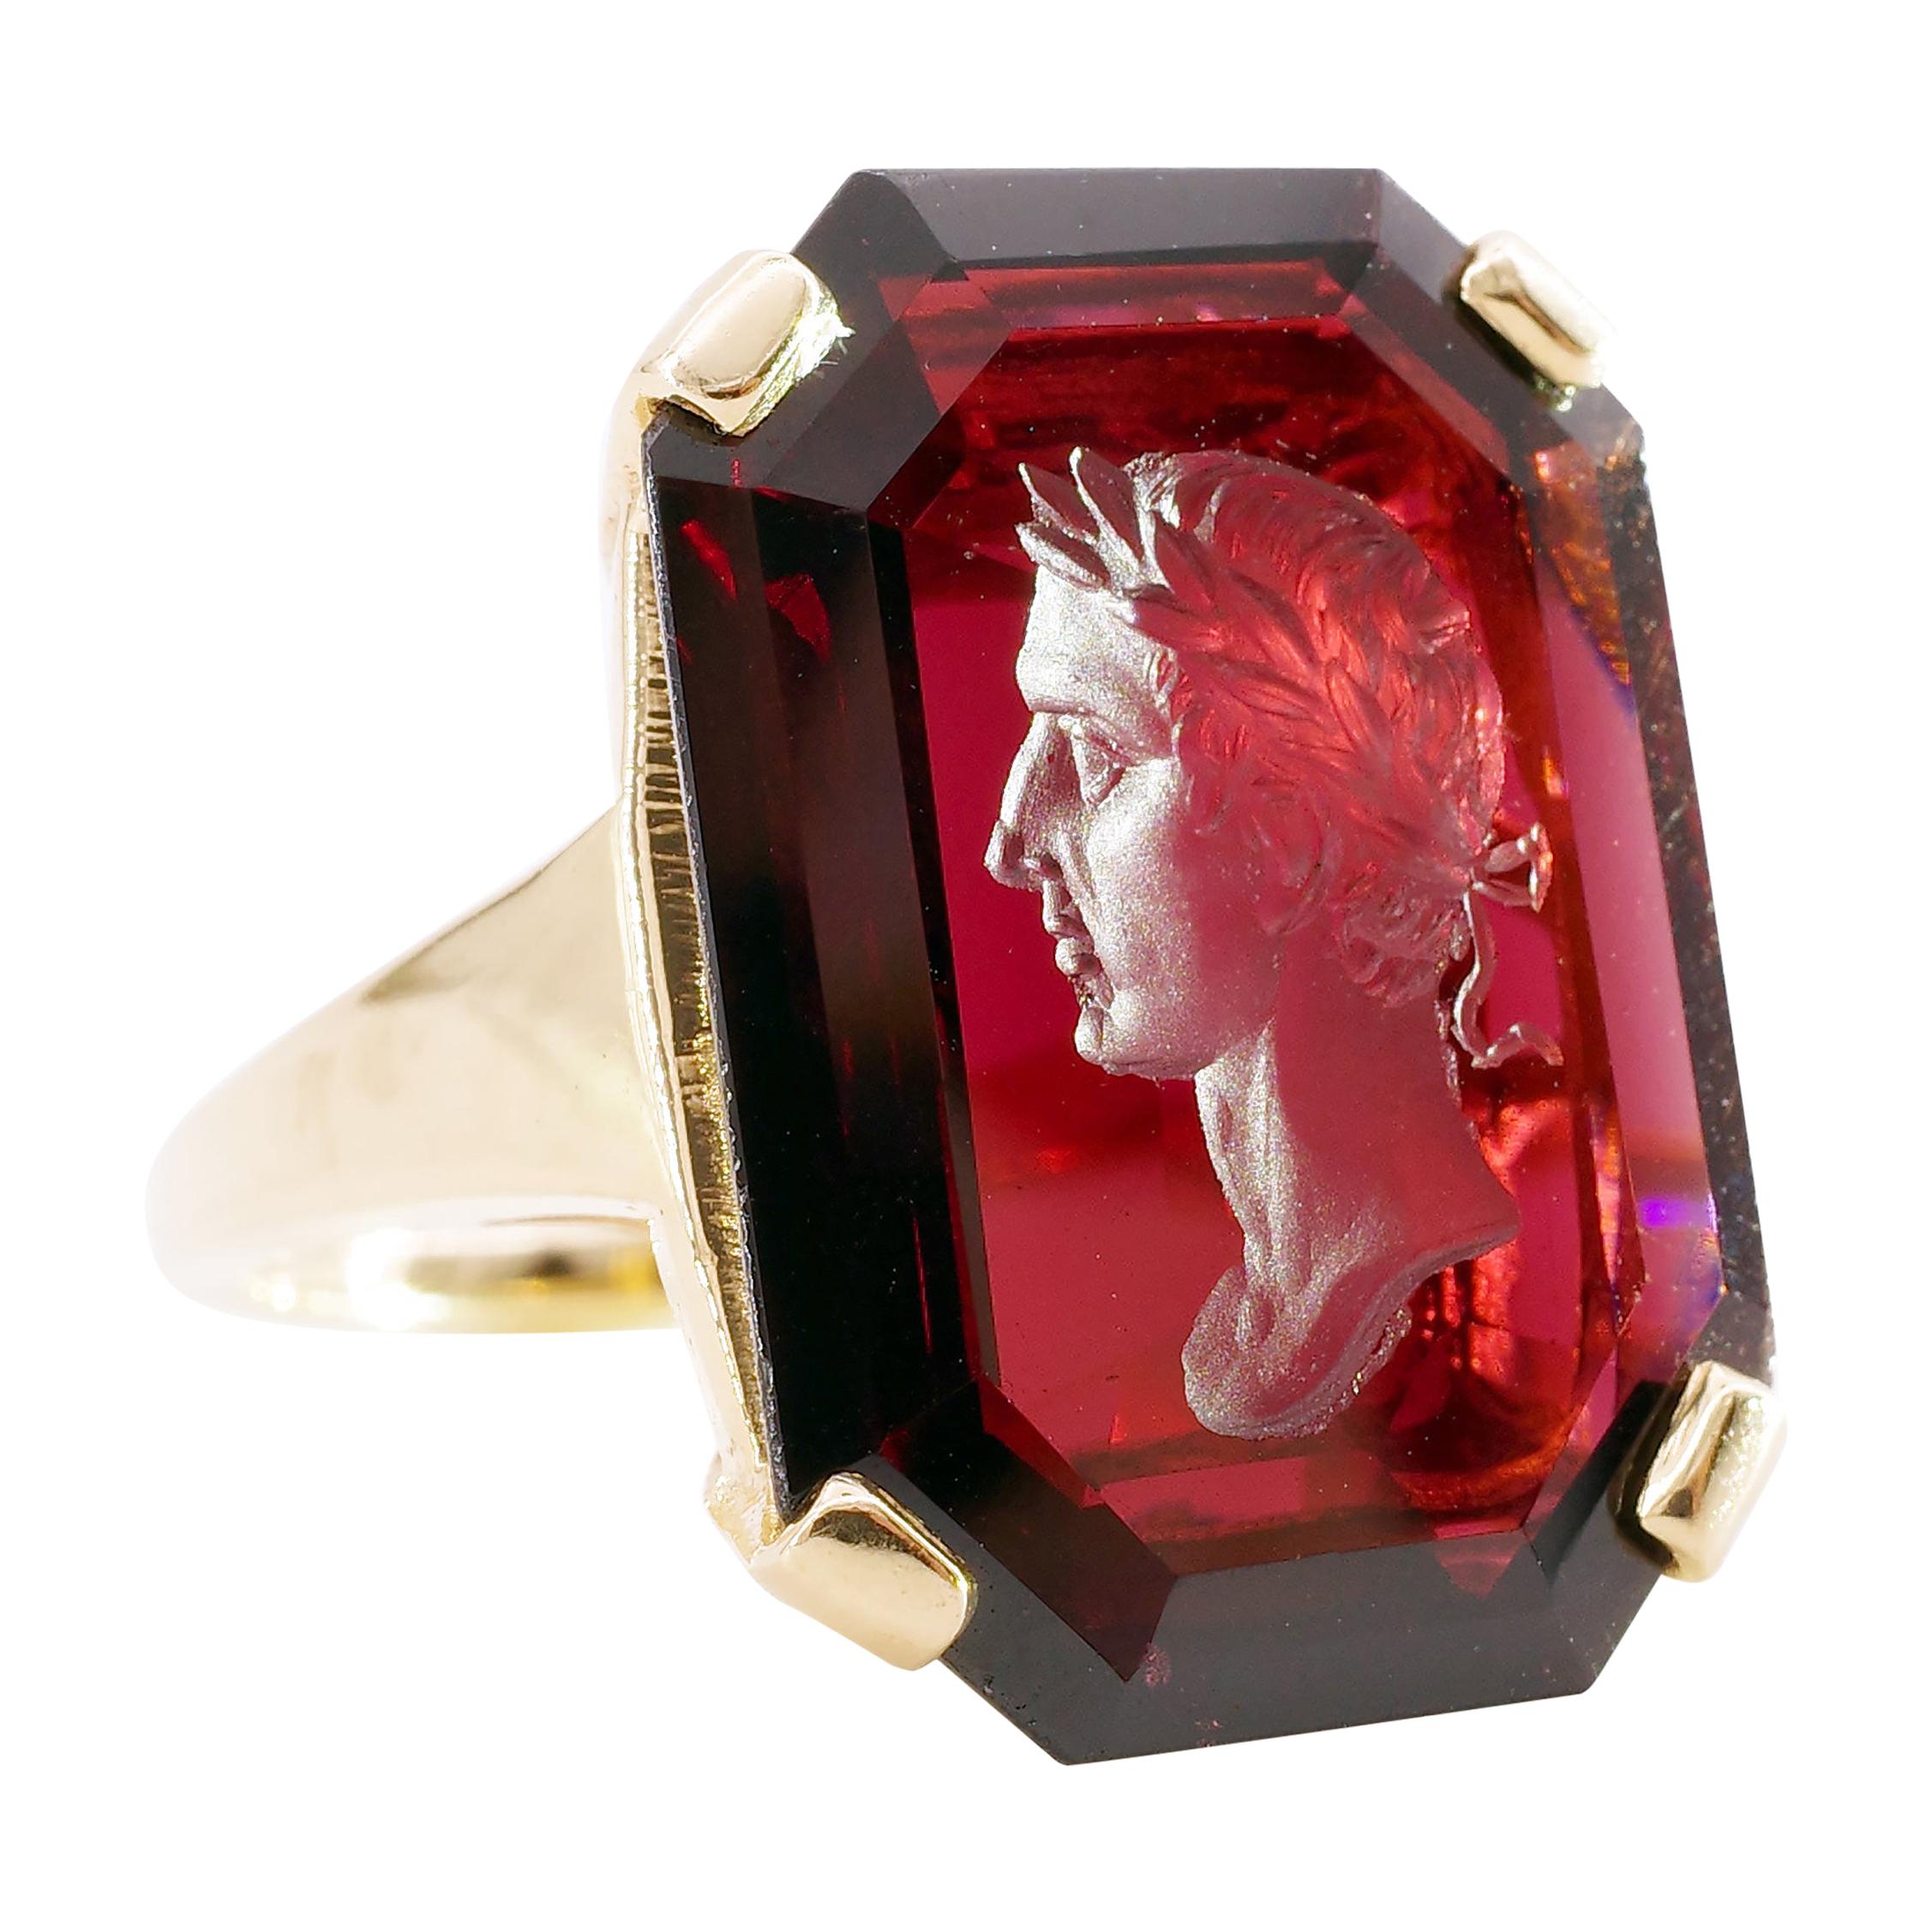 Garnet Intaglio Ring of Young Dionysus the Wine God in Retro Setting